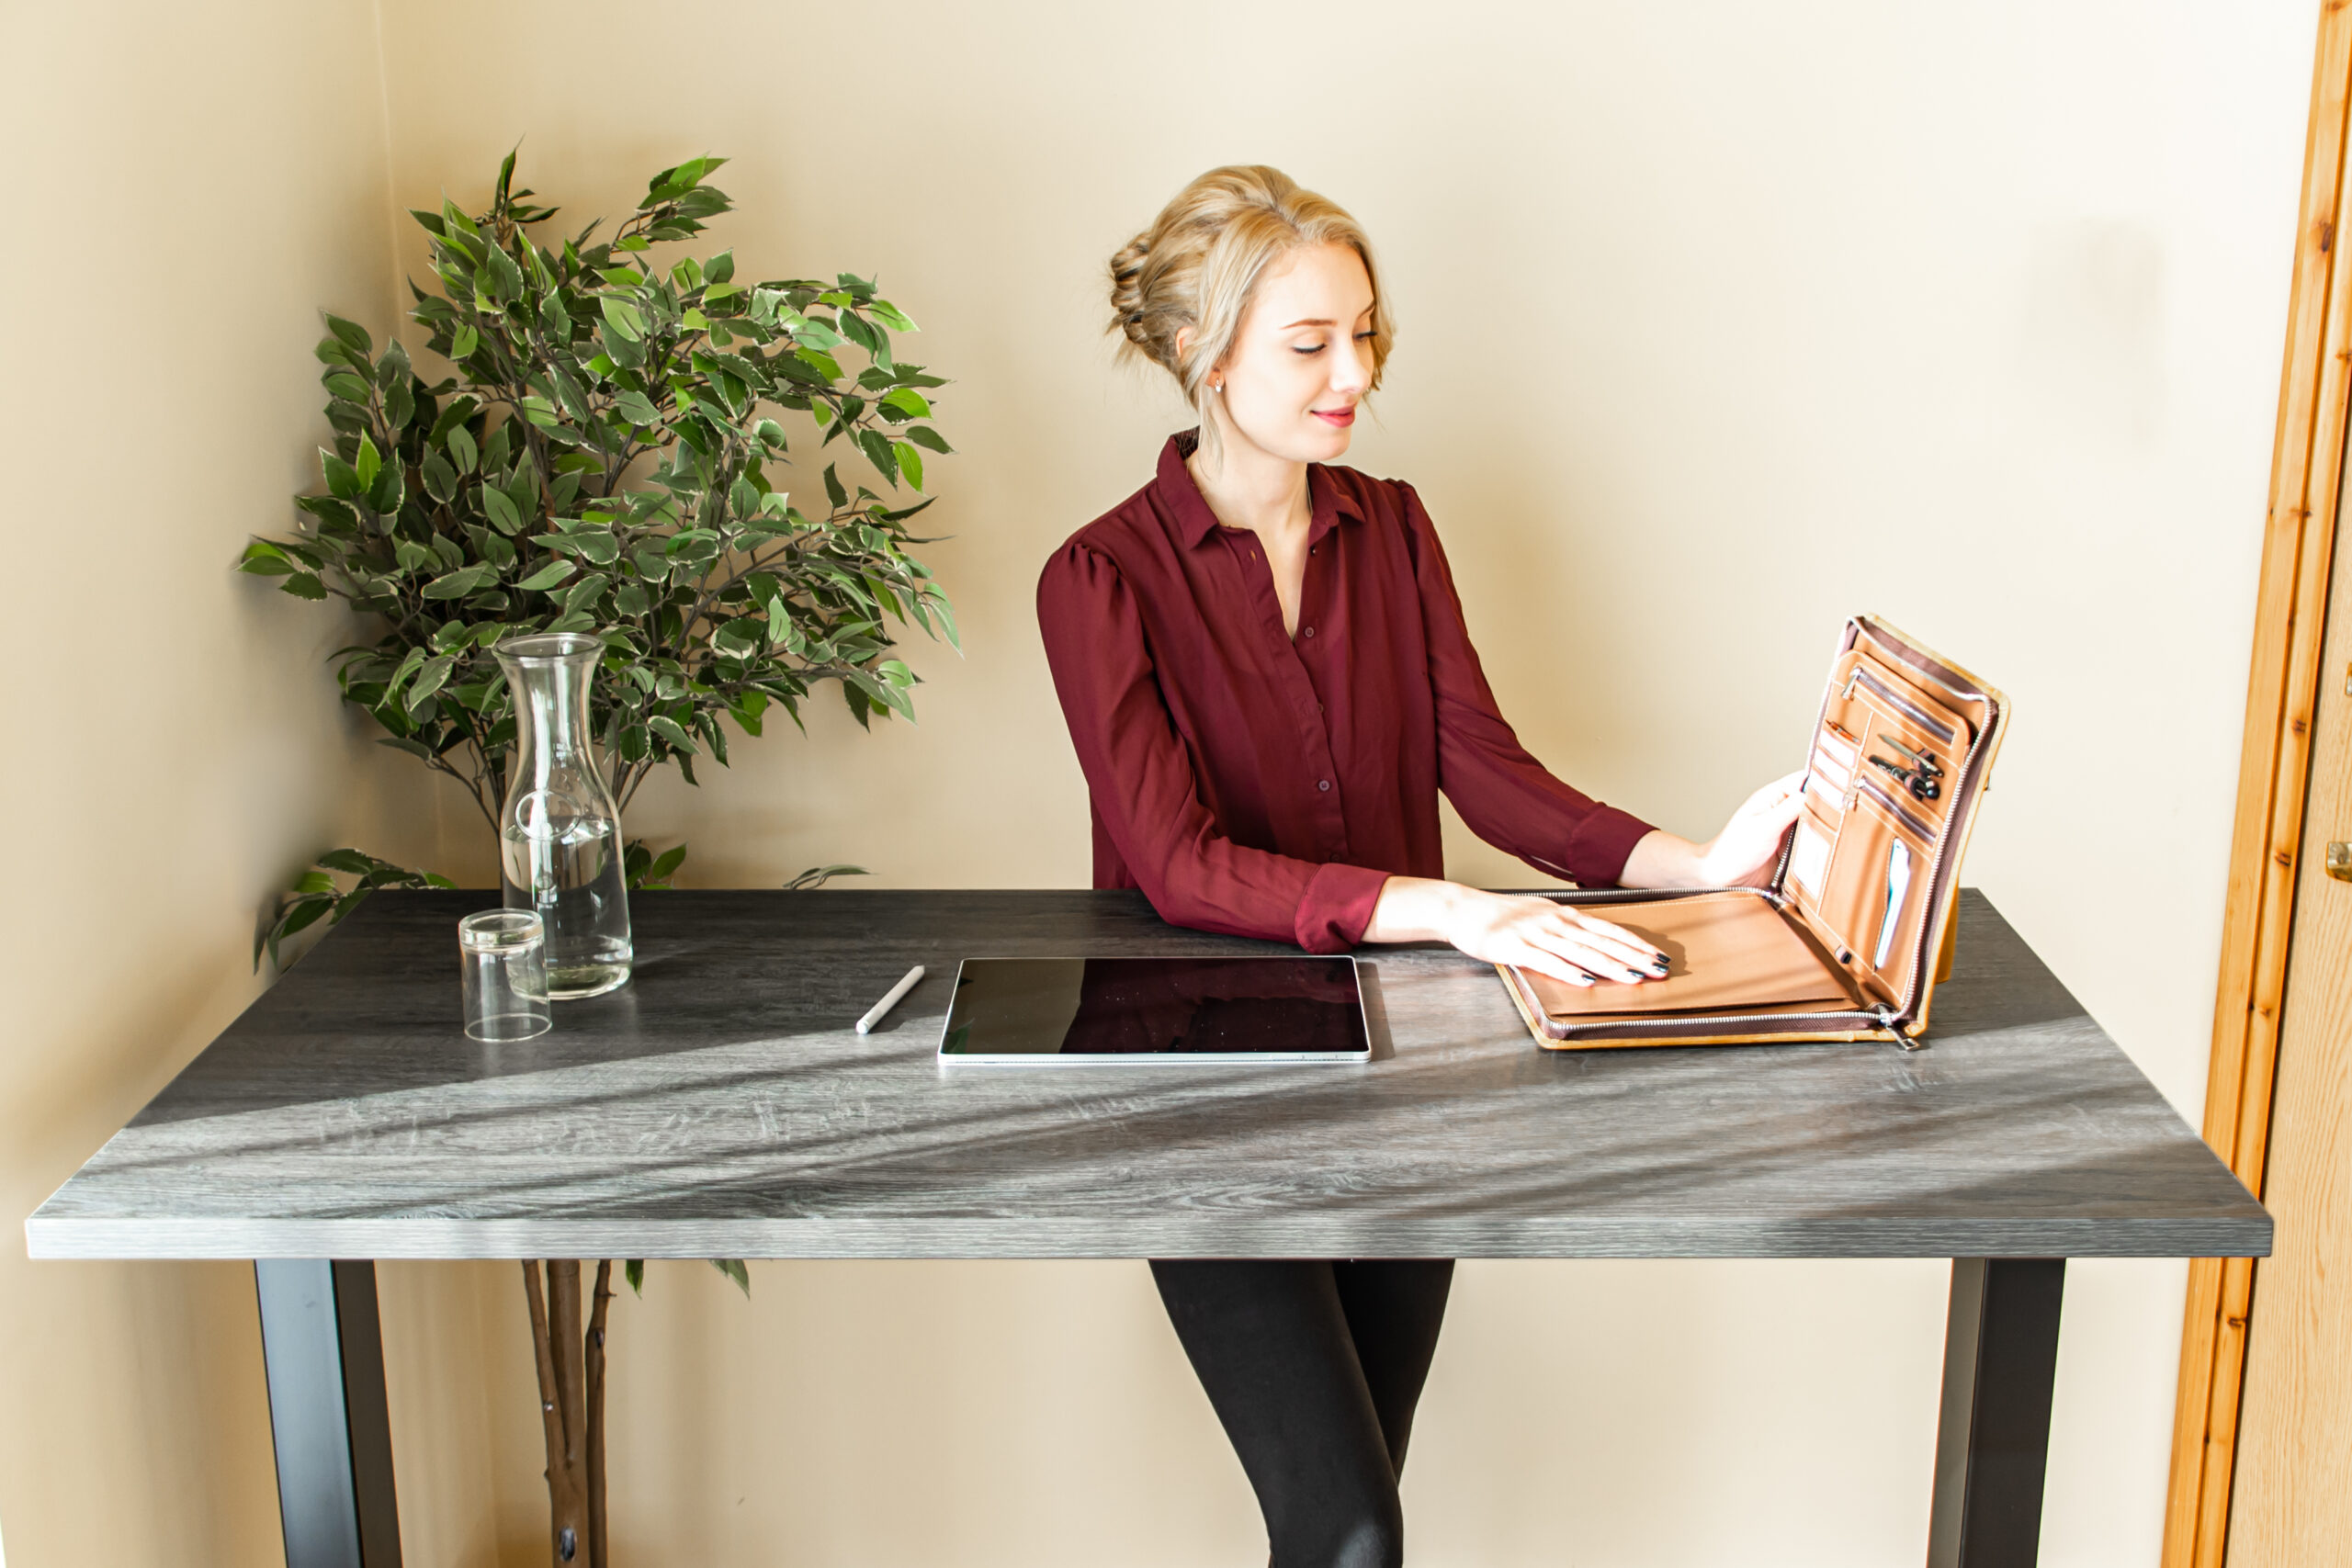 Ways to improve your posture with a standing desk - Blog post by Lavoro Design